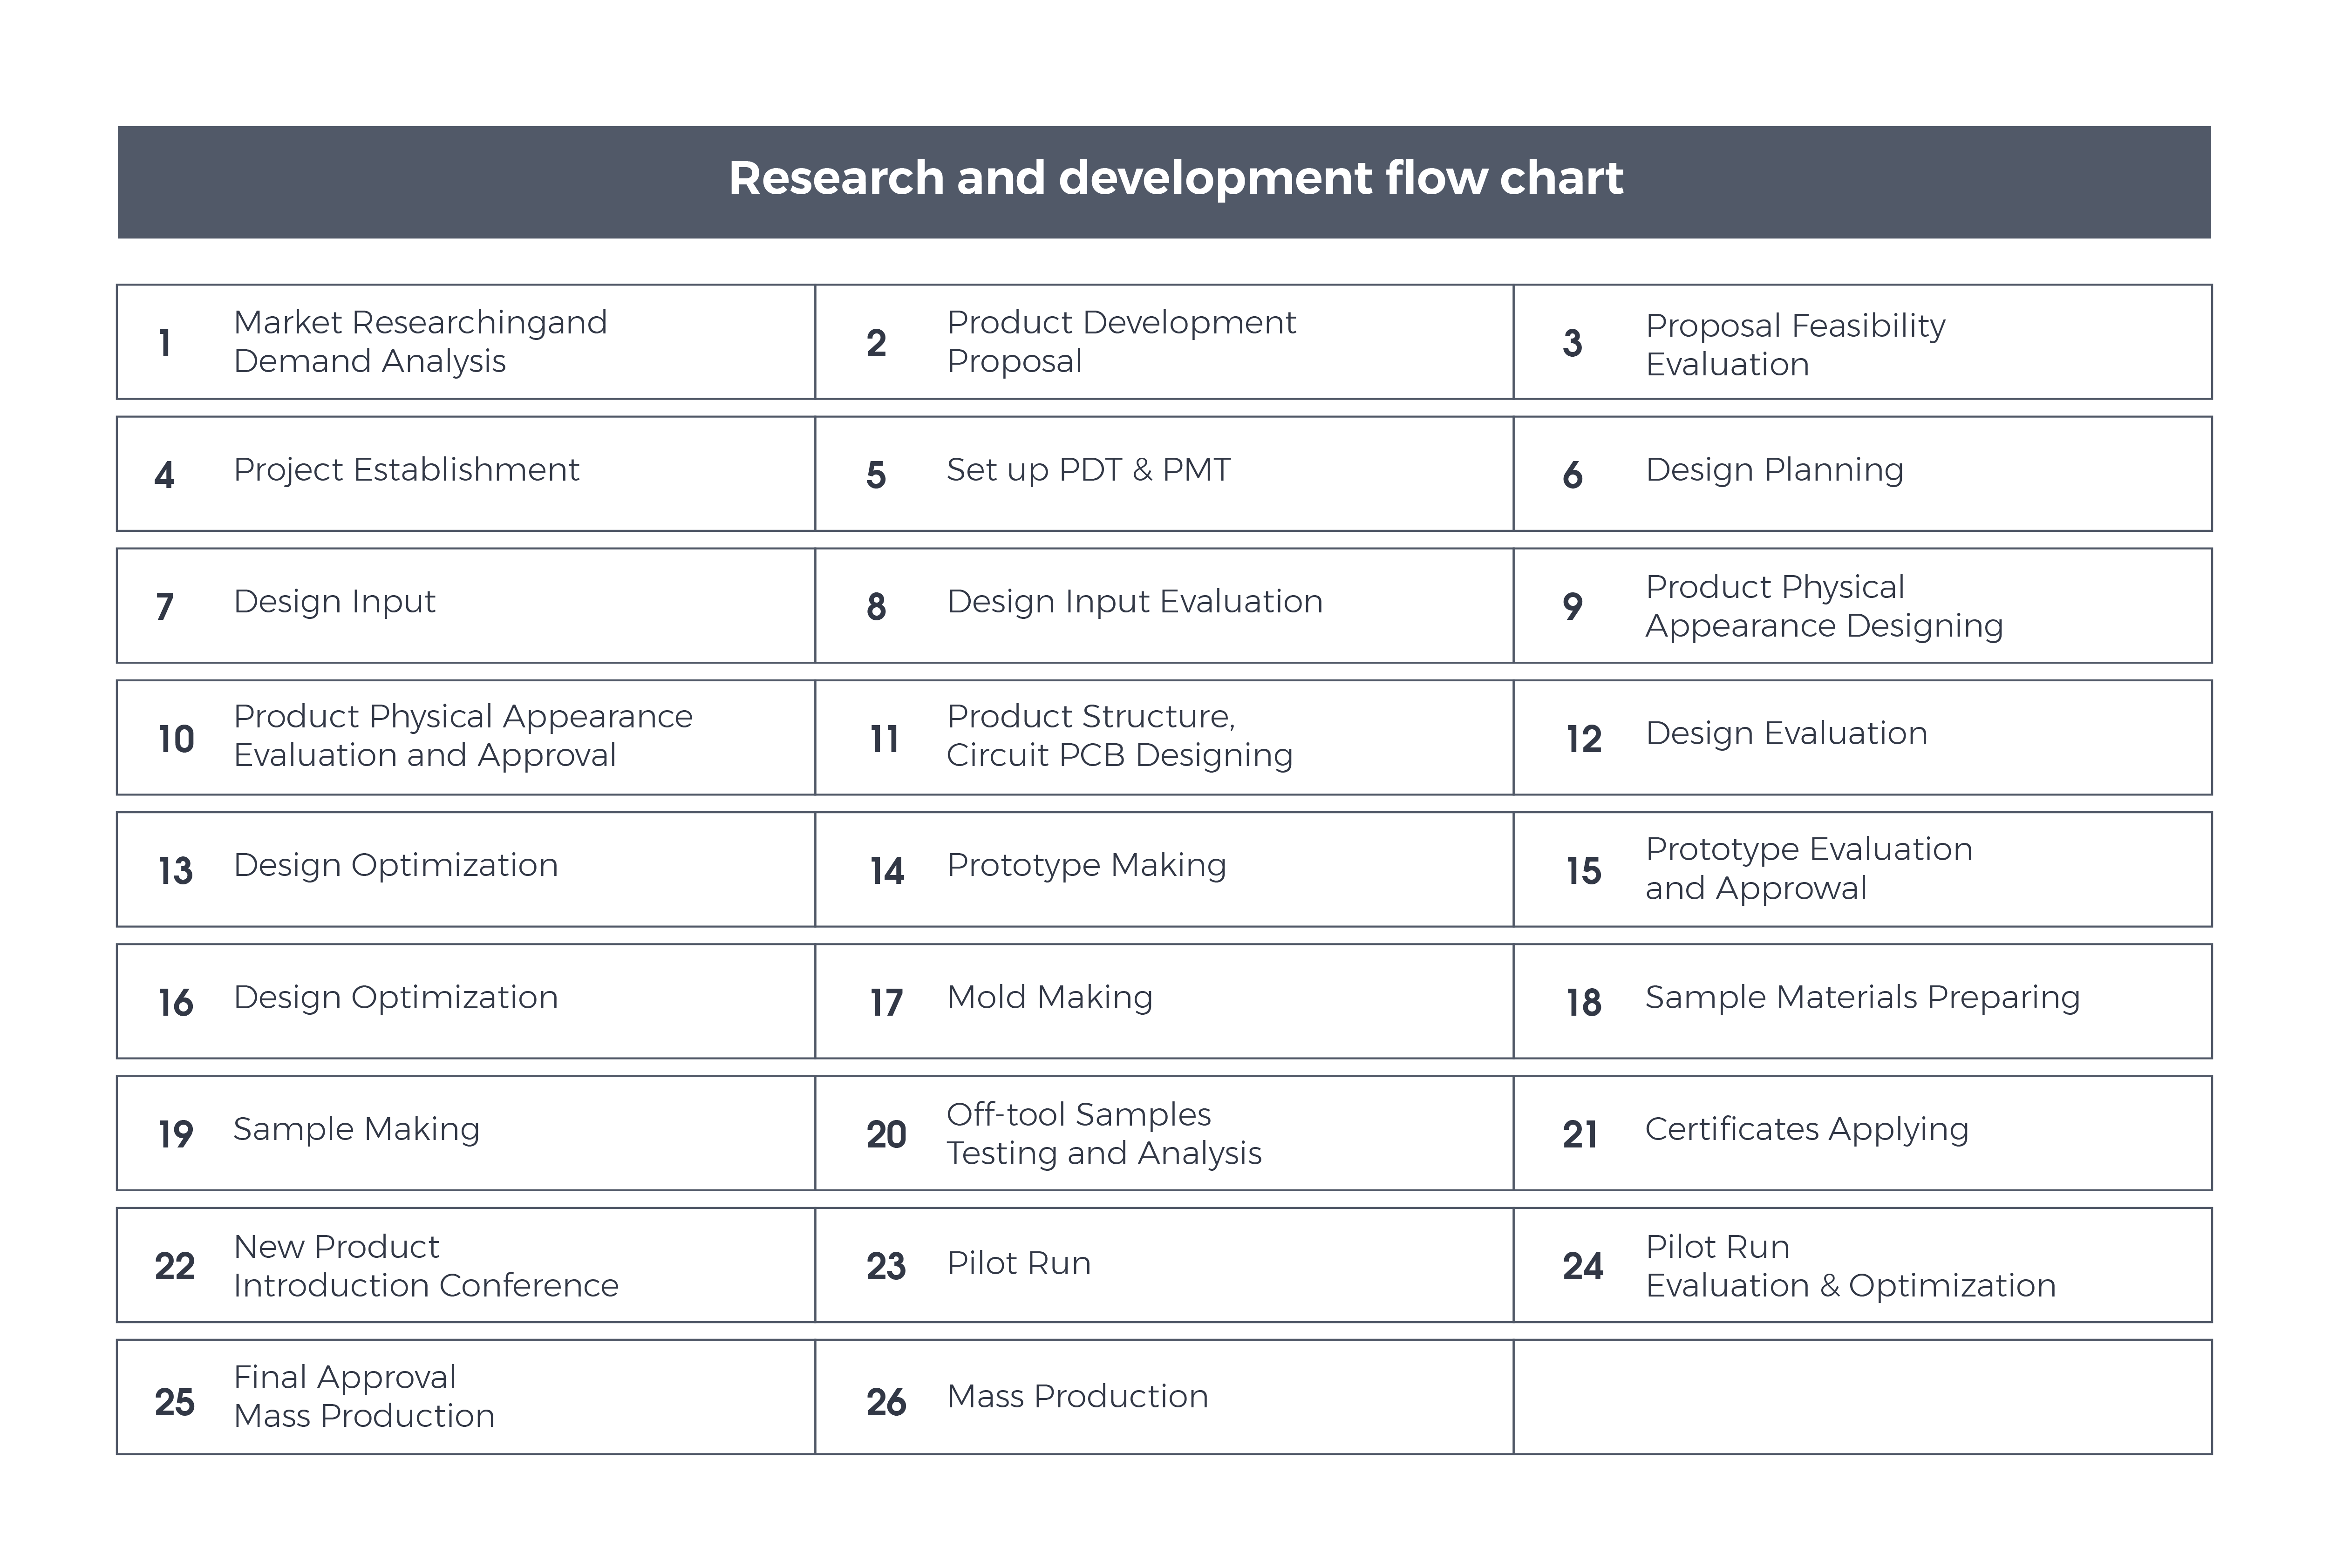 Research and development flow chart